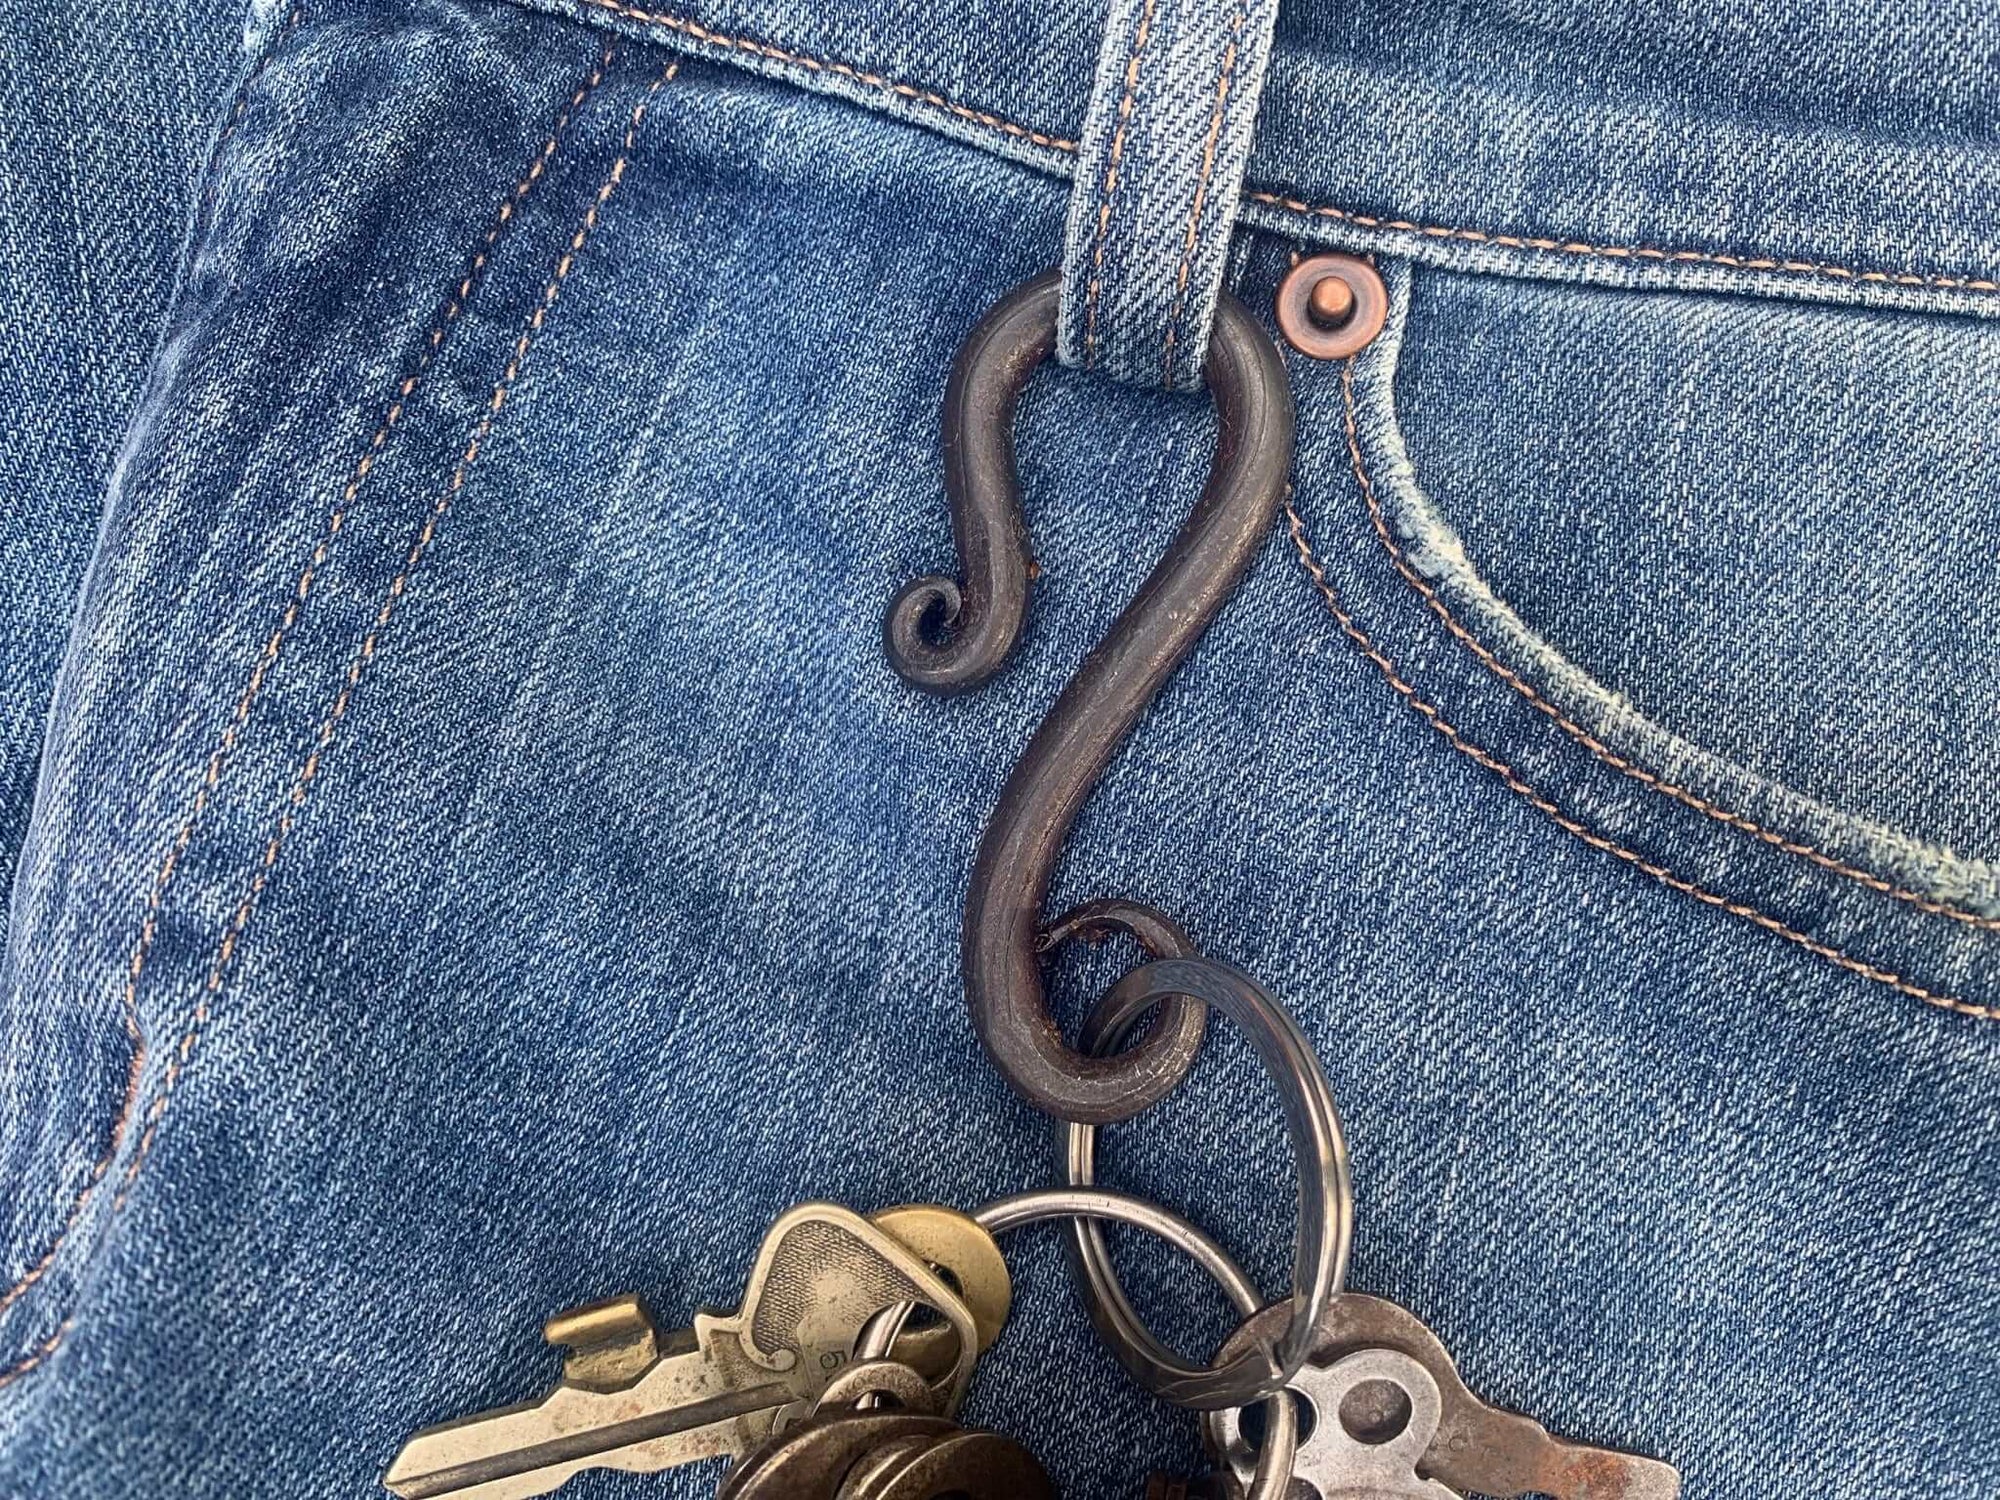 Handcrafted keychain for belt loop. Detail